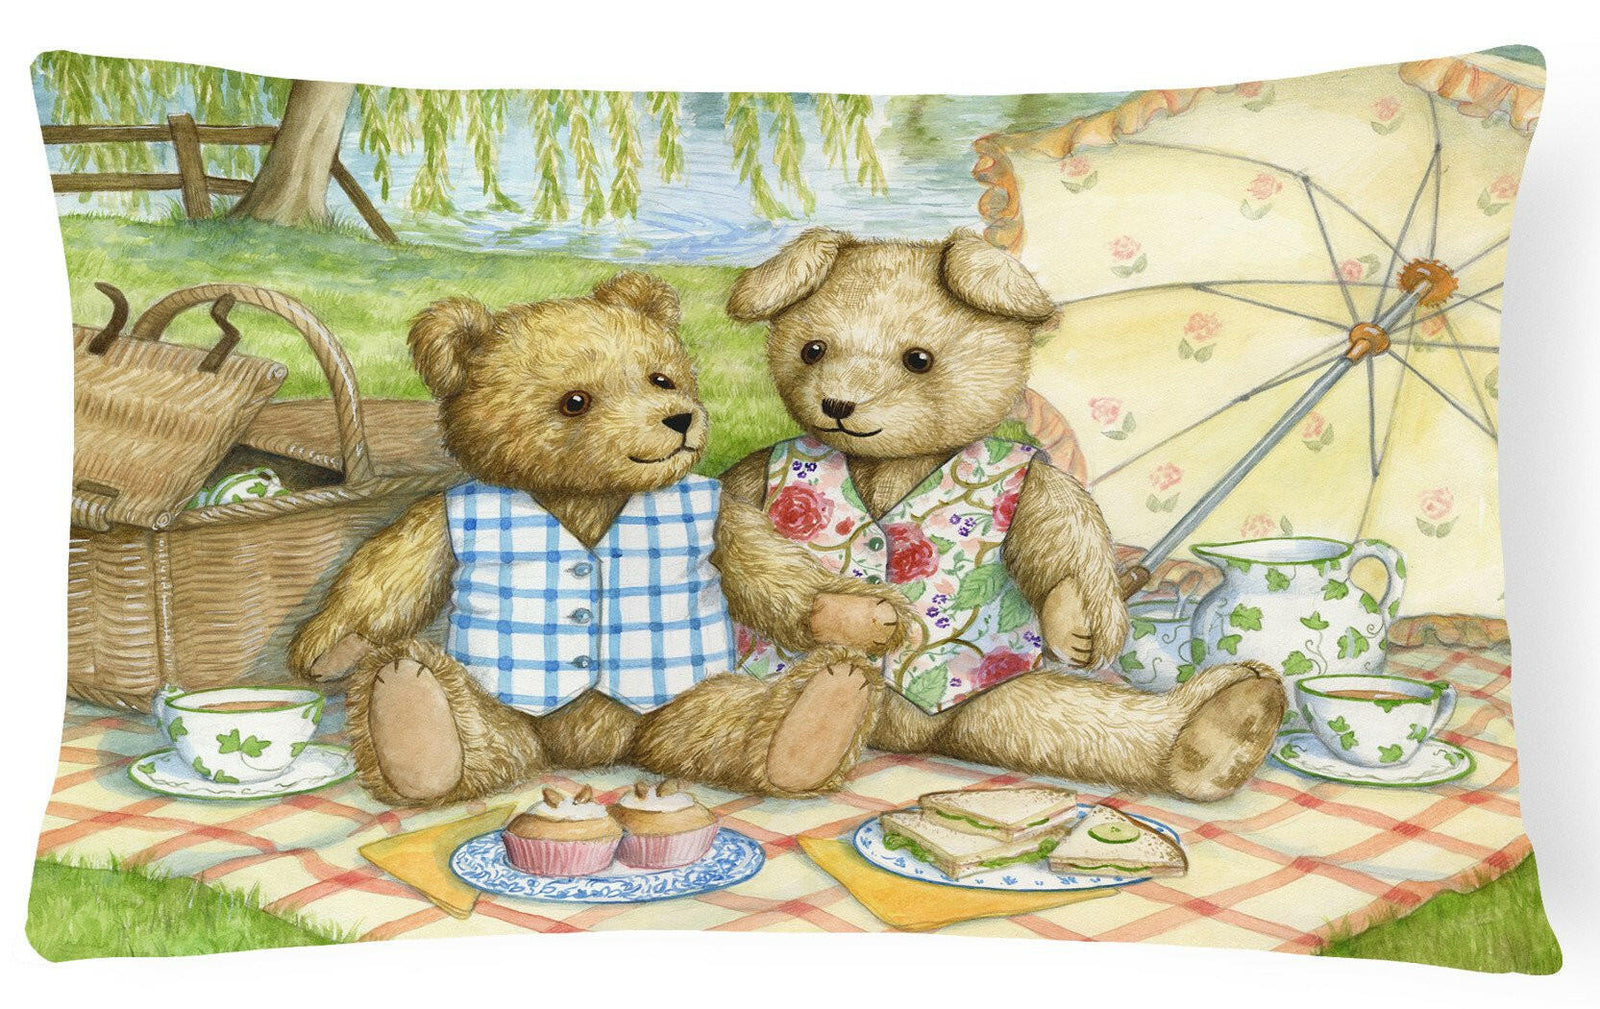 Summertime Teddy Bears Picnic Fabric Decorative Pillow CDCO0308PW1216 by Caroline's Treasures